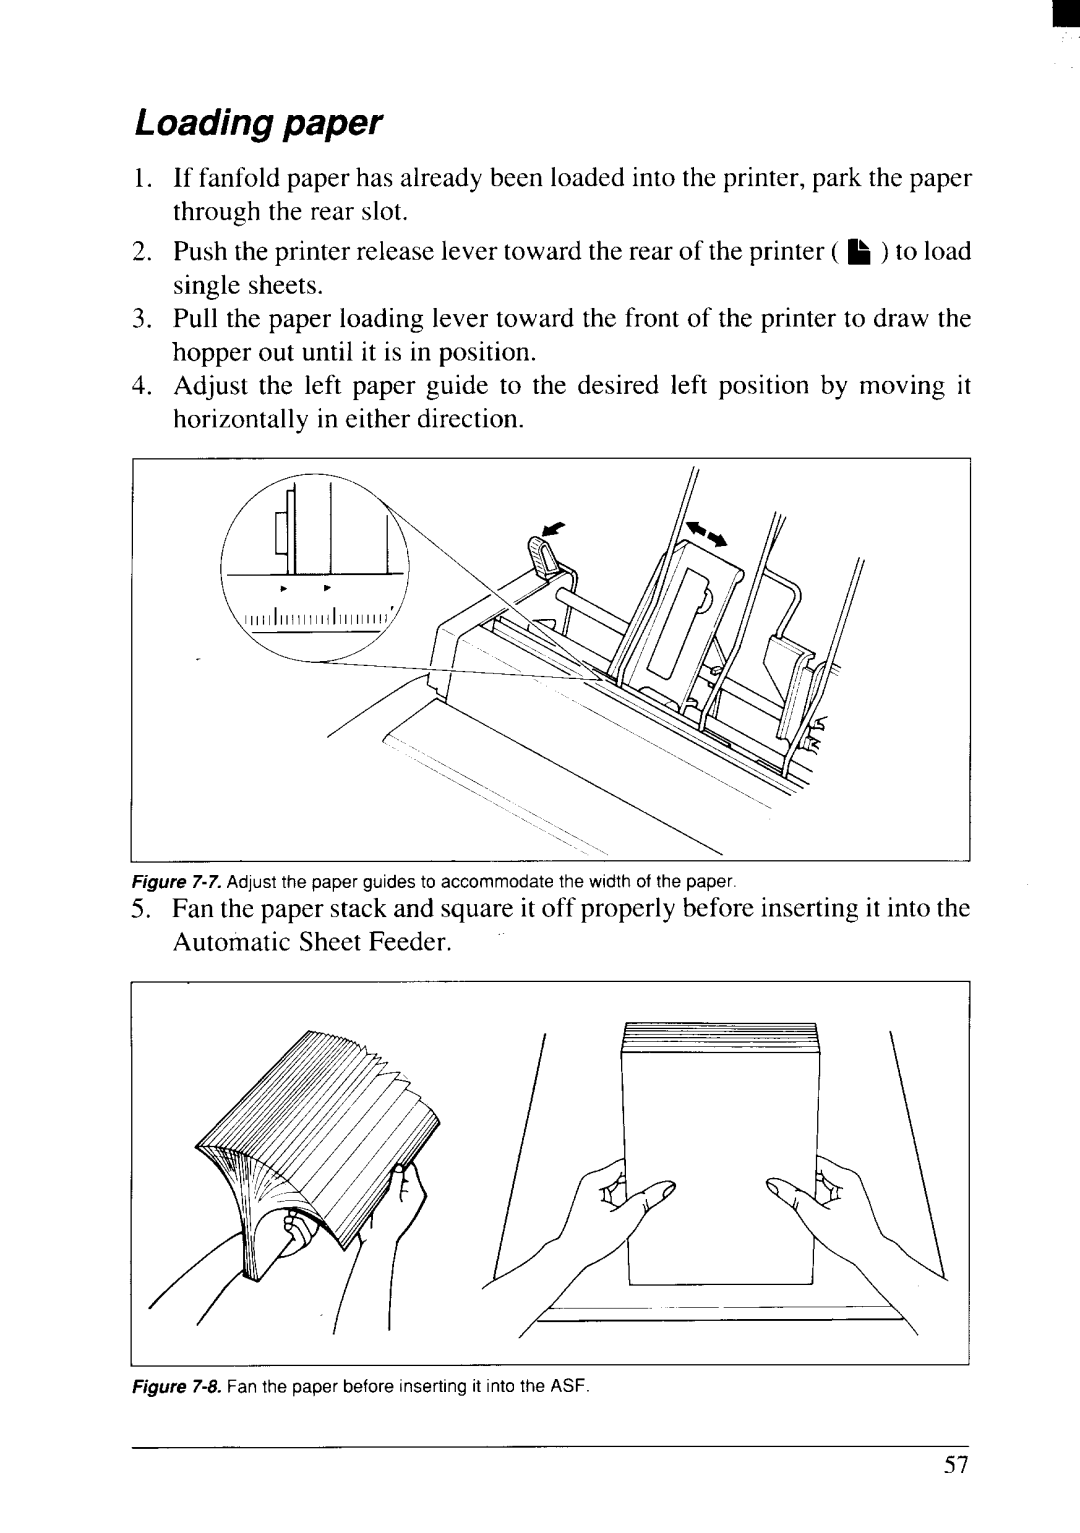 Star Micronics NX-2415II user manual Loading paper, 8. Fan the paper before inserting it into the ASF 